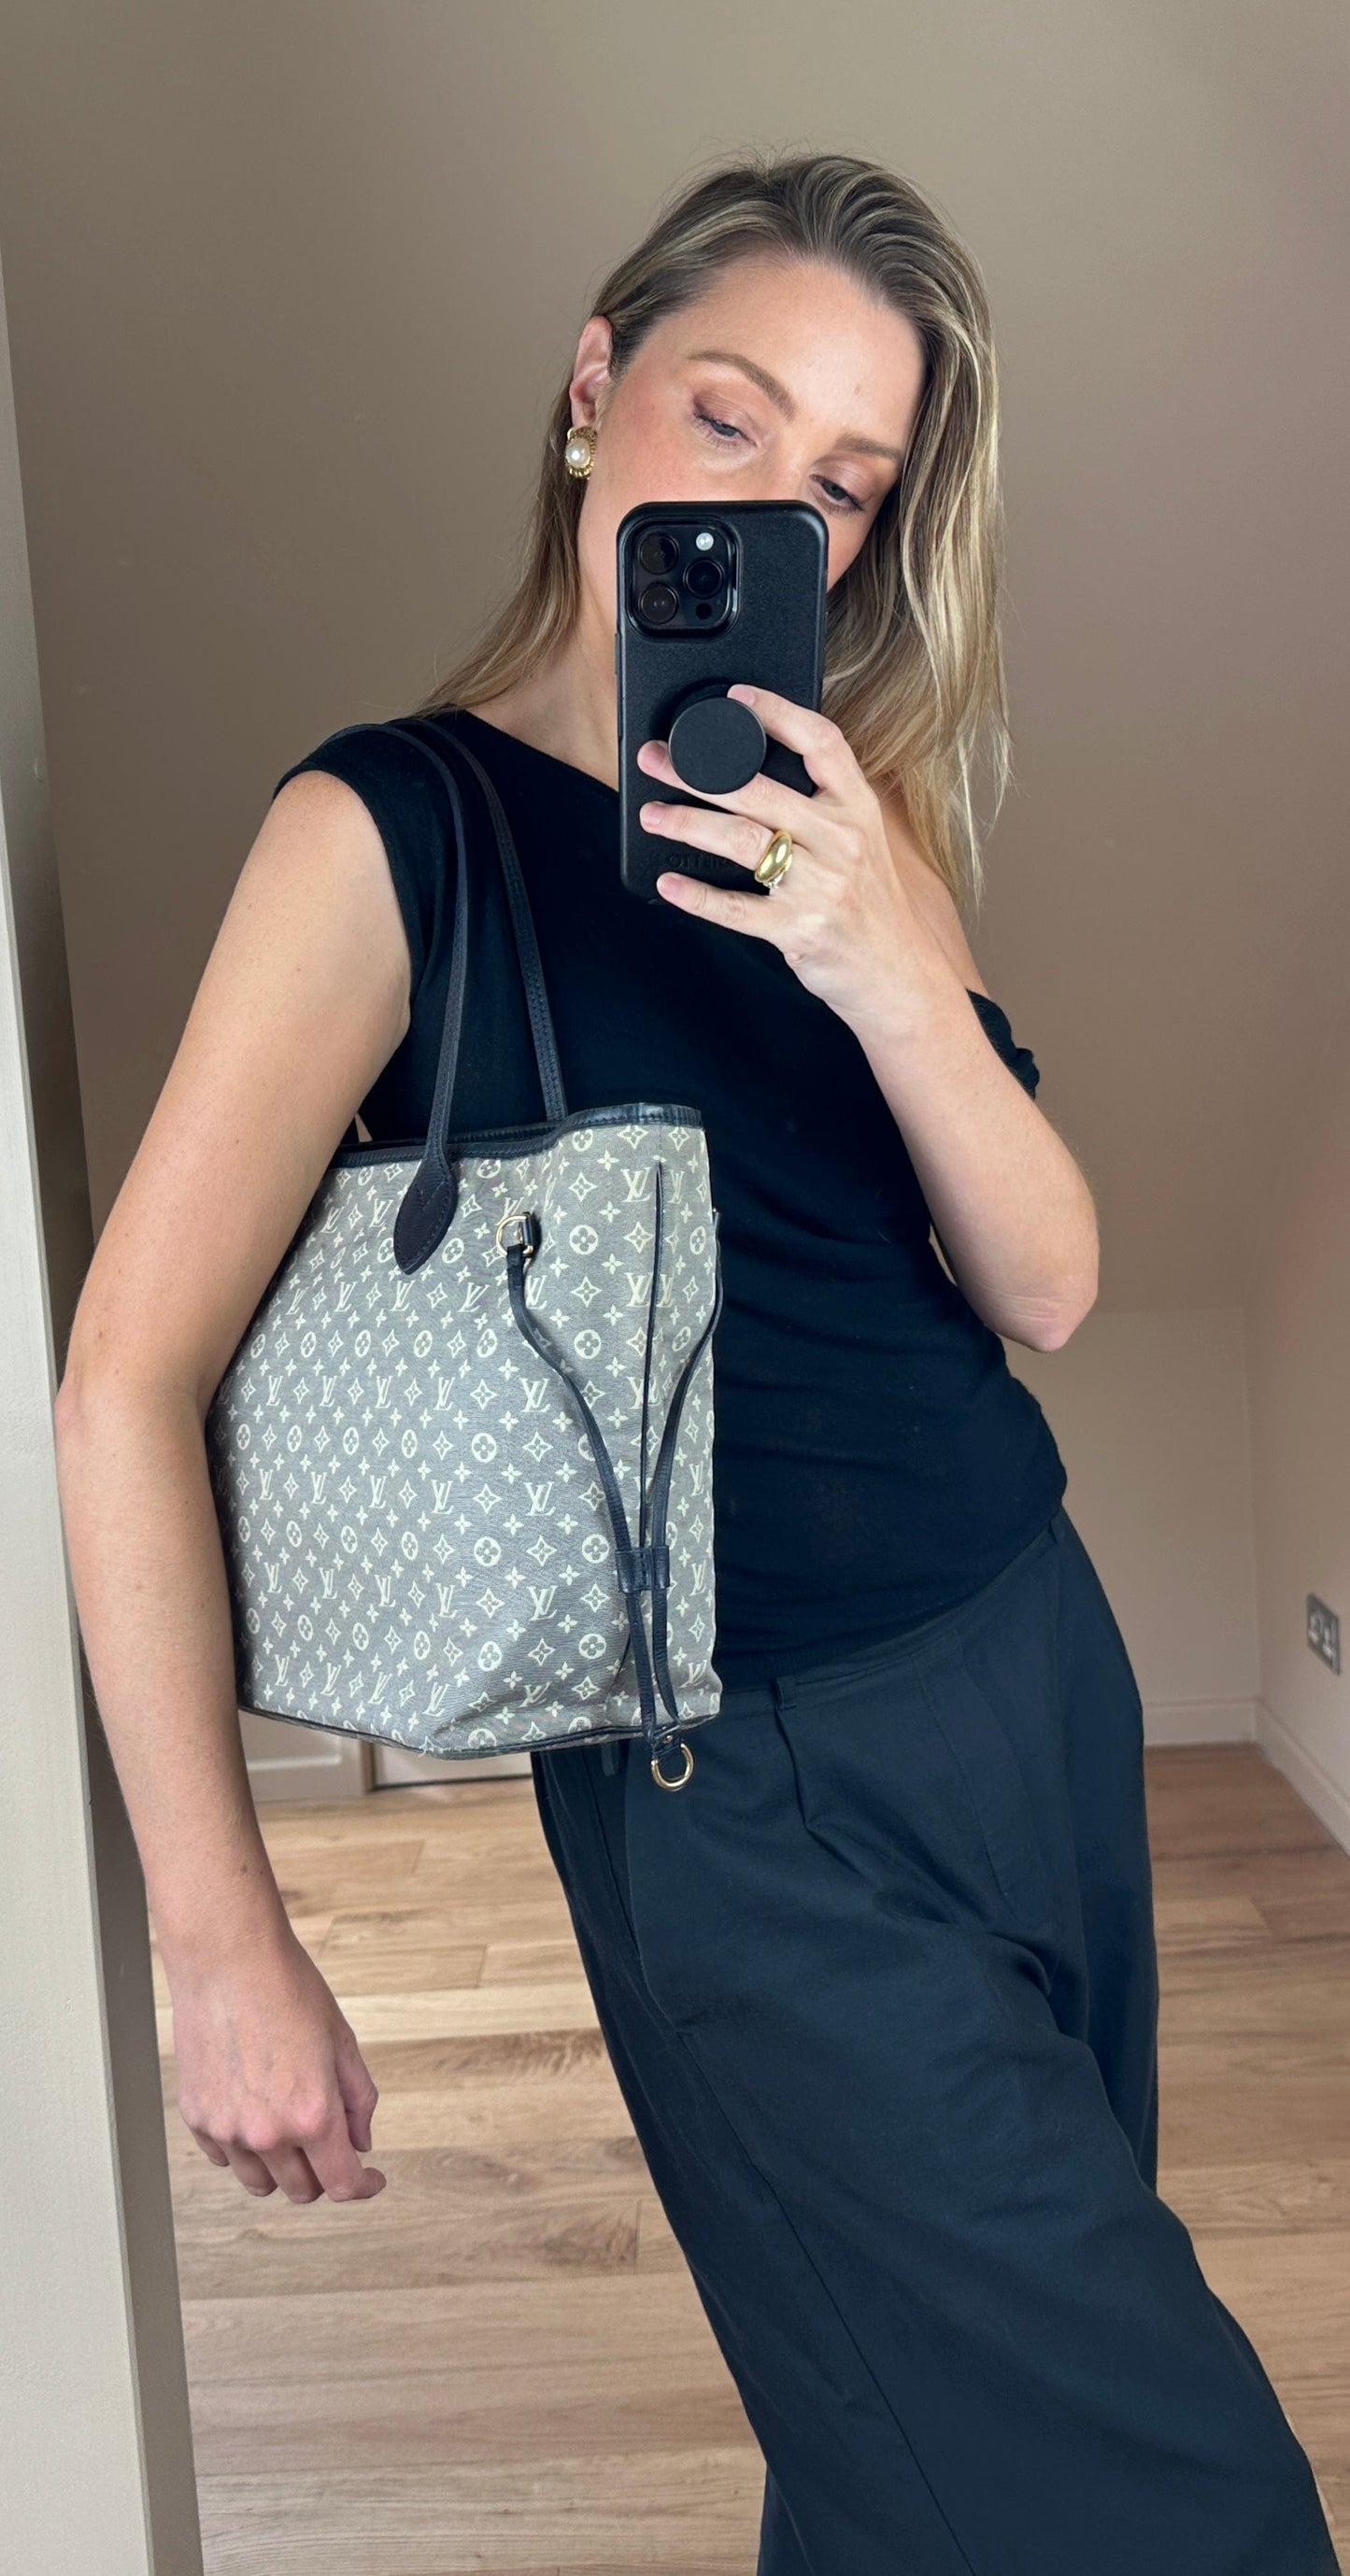 neverfull mm monogram outfit